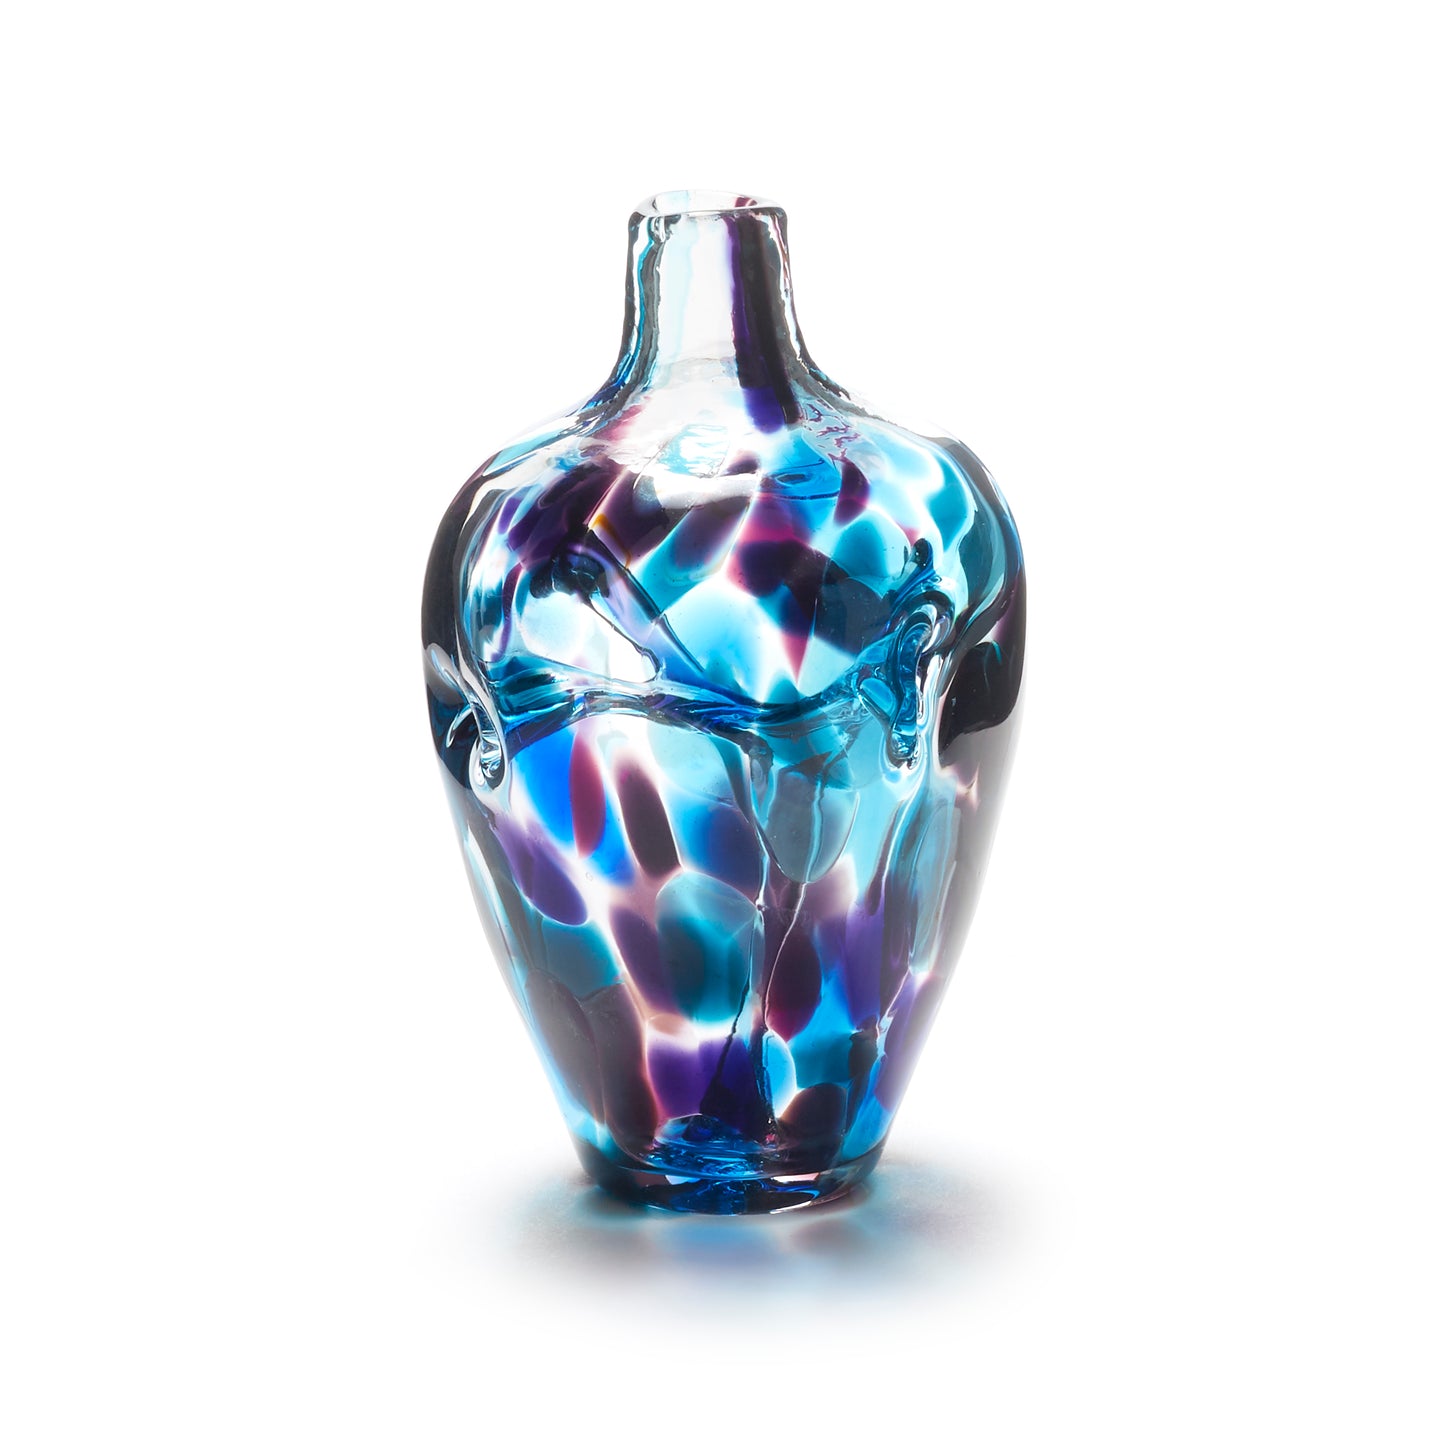 Miniature hand blown glass vase. Teal blue and purple glass. Colour combination is called "Amethyst Teal."